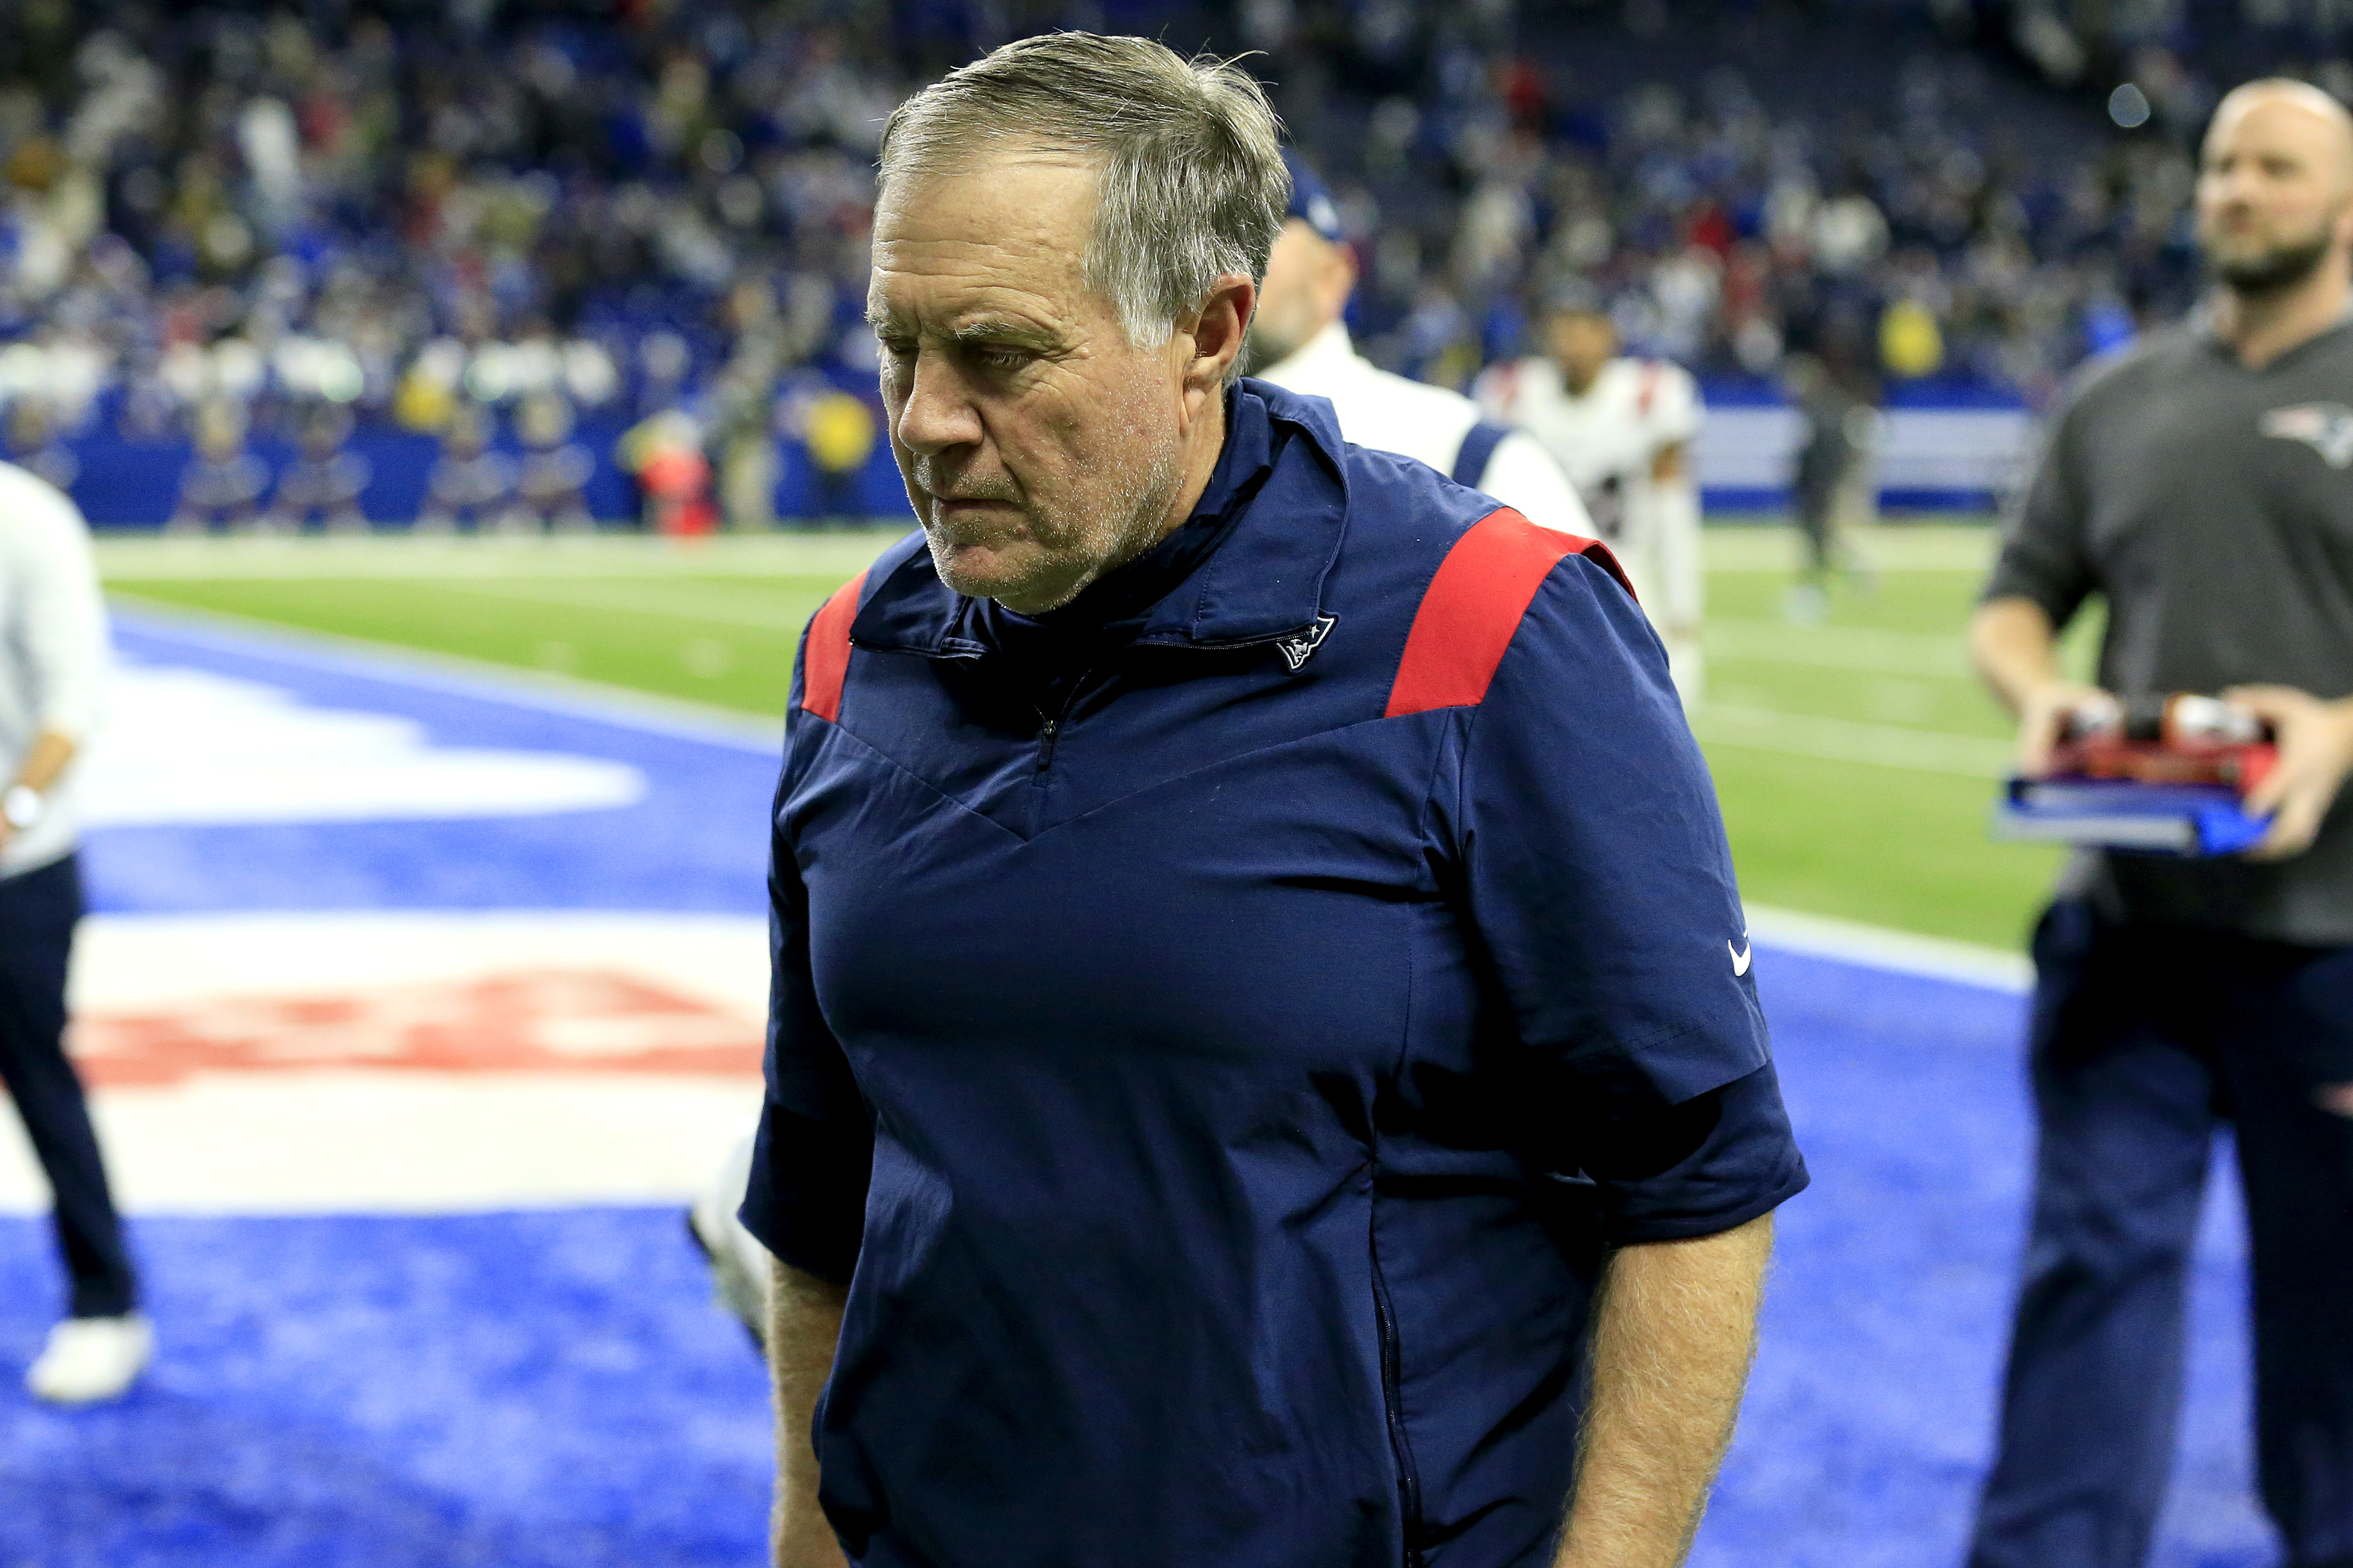 Bill Belichick Offers Apology To Reporters After Silent Press Conference